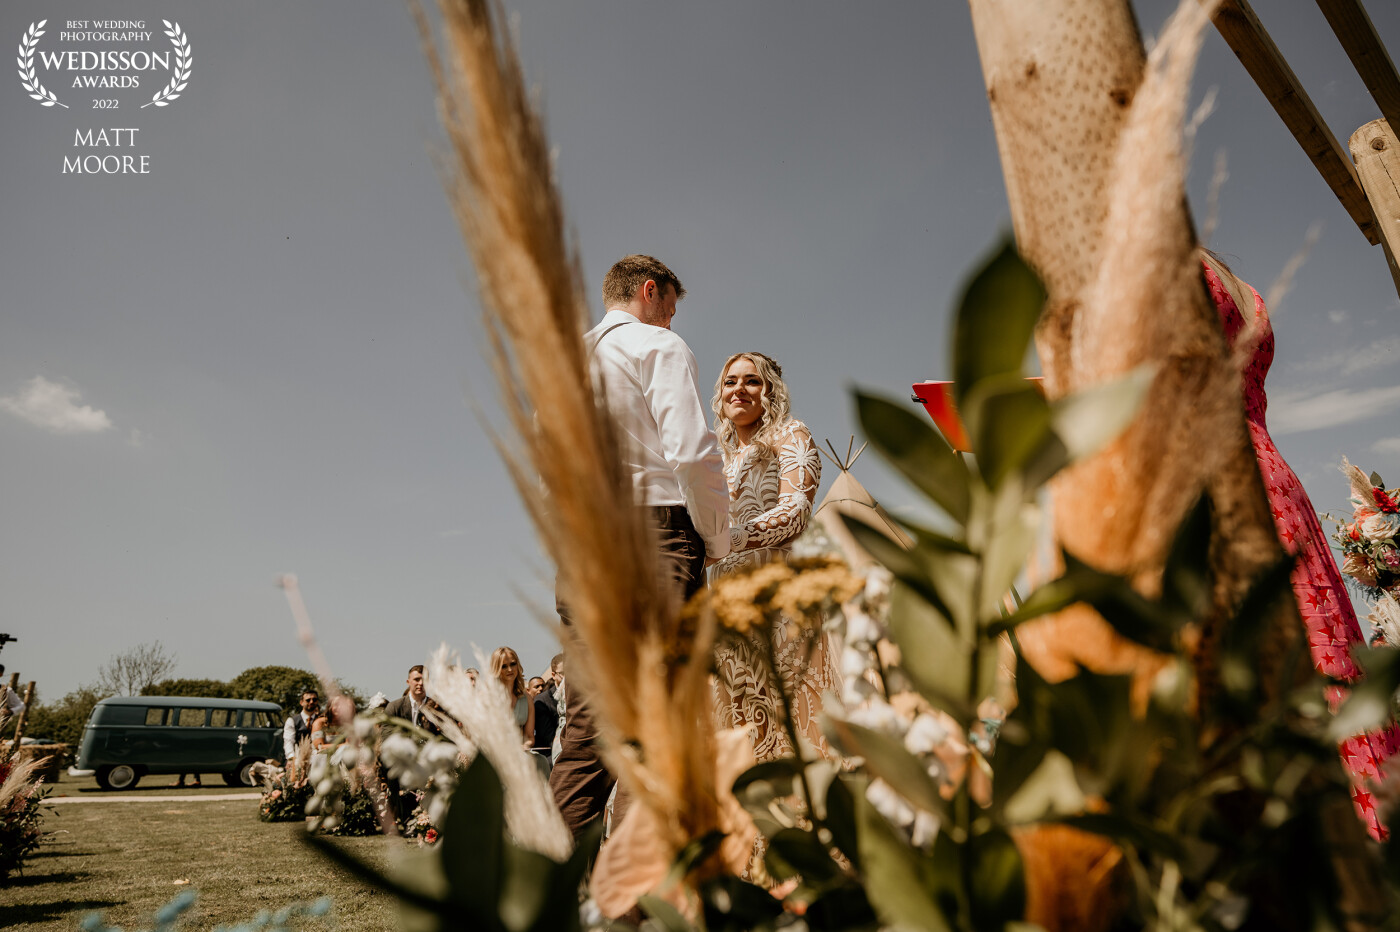 Jack and Megan's boho wedding was just amazing. Situated right in the garden of her fathers address, they enjoyed a fabulous day with friends and loved ones. Jack and Megan upcycled a lot of furniture and decor to make this a very personalised wedding day